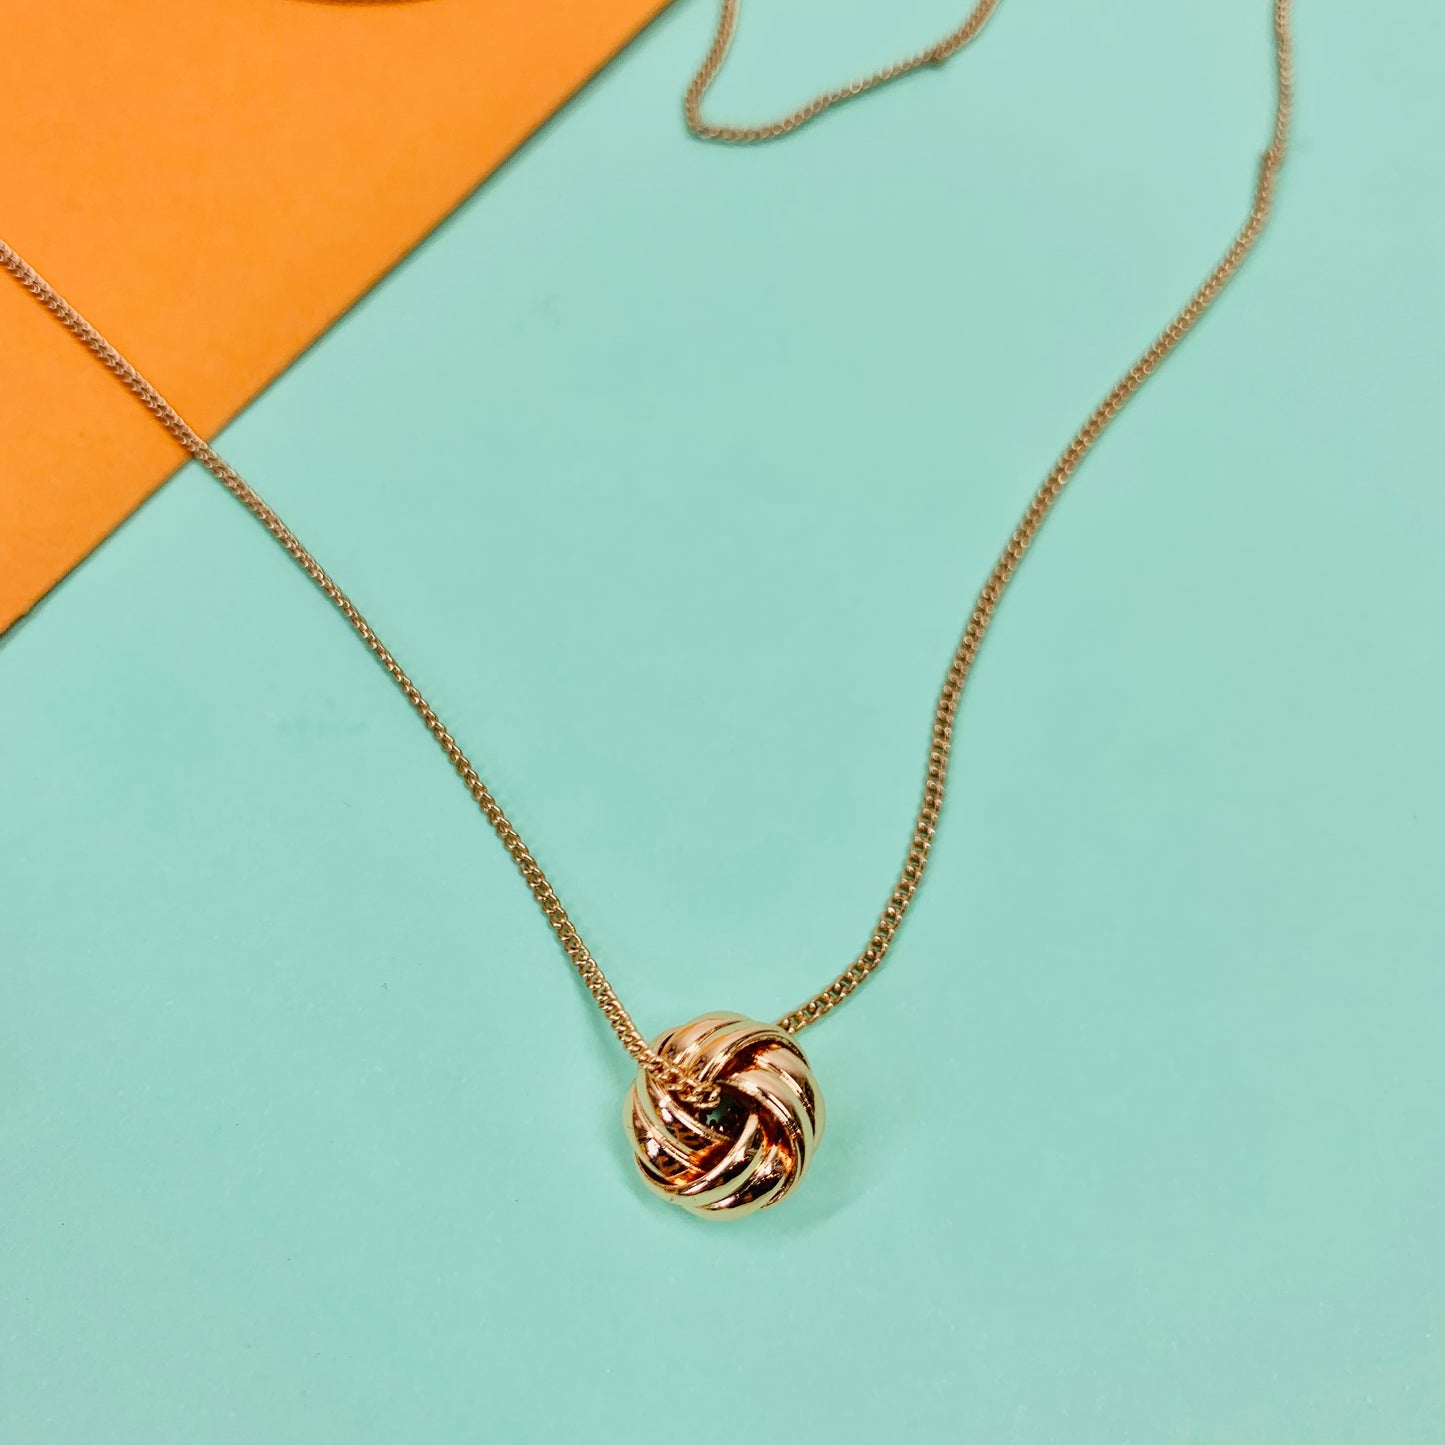 Vintage rose gold plated necklace with knot ball pendant